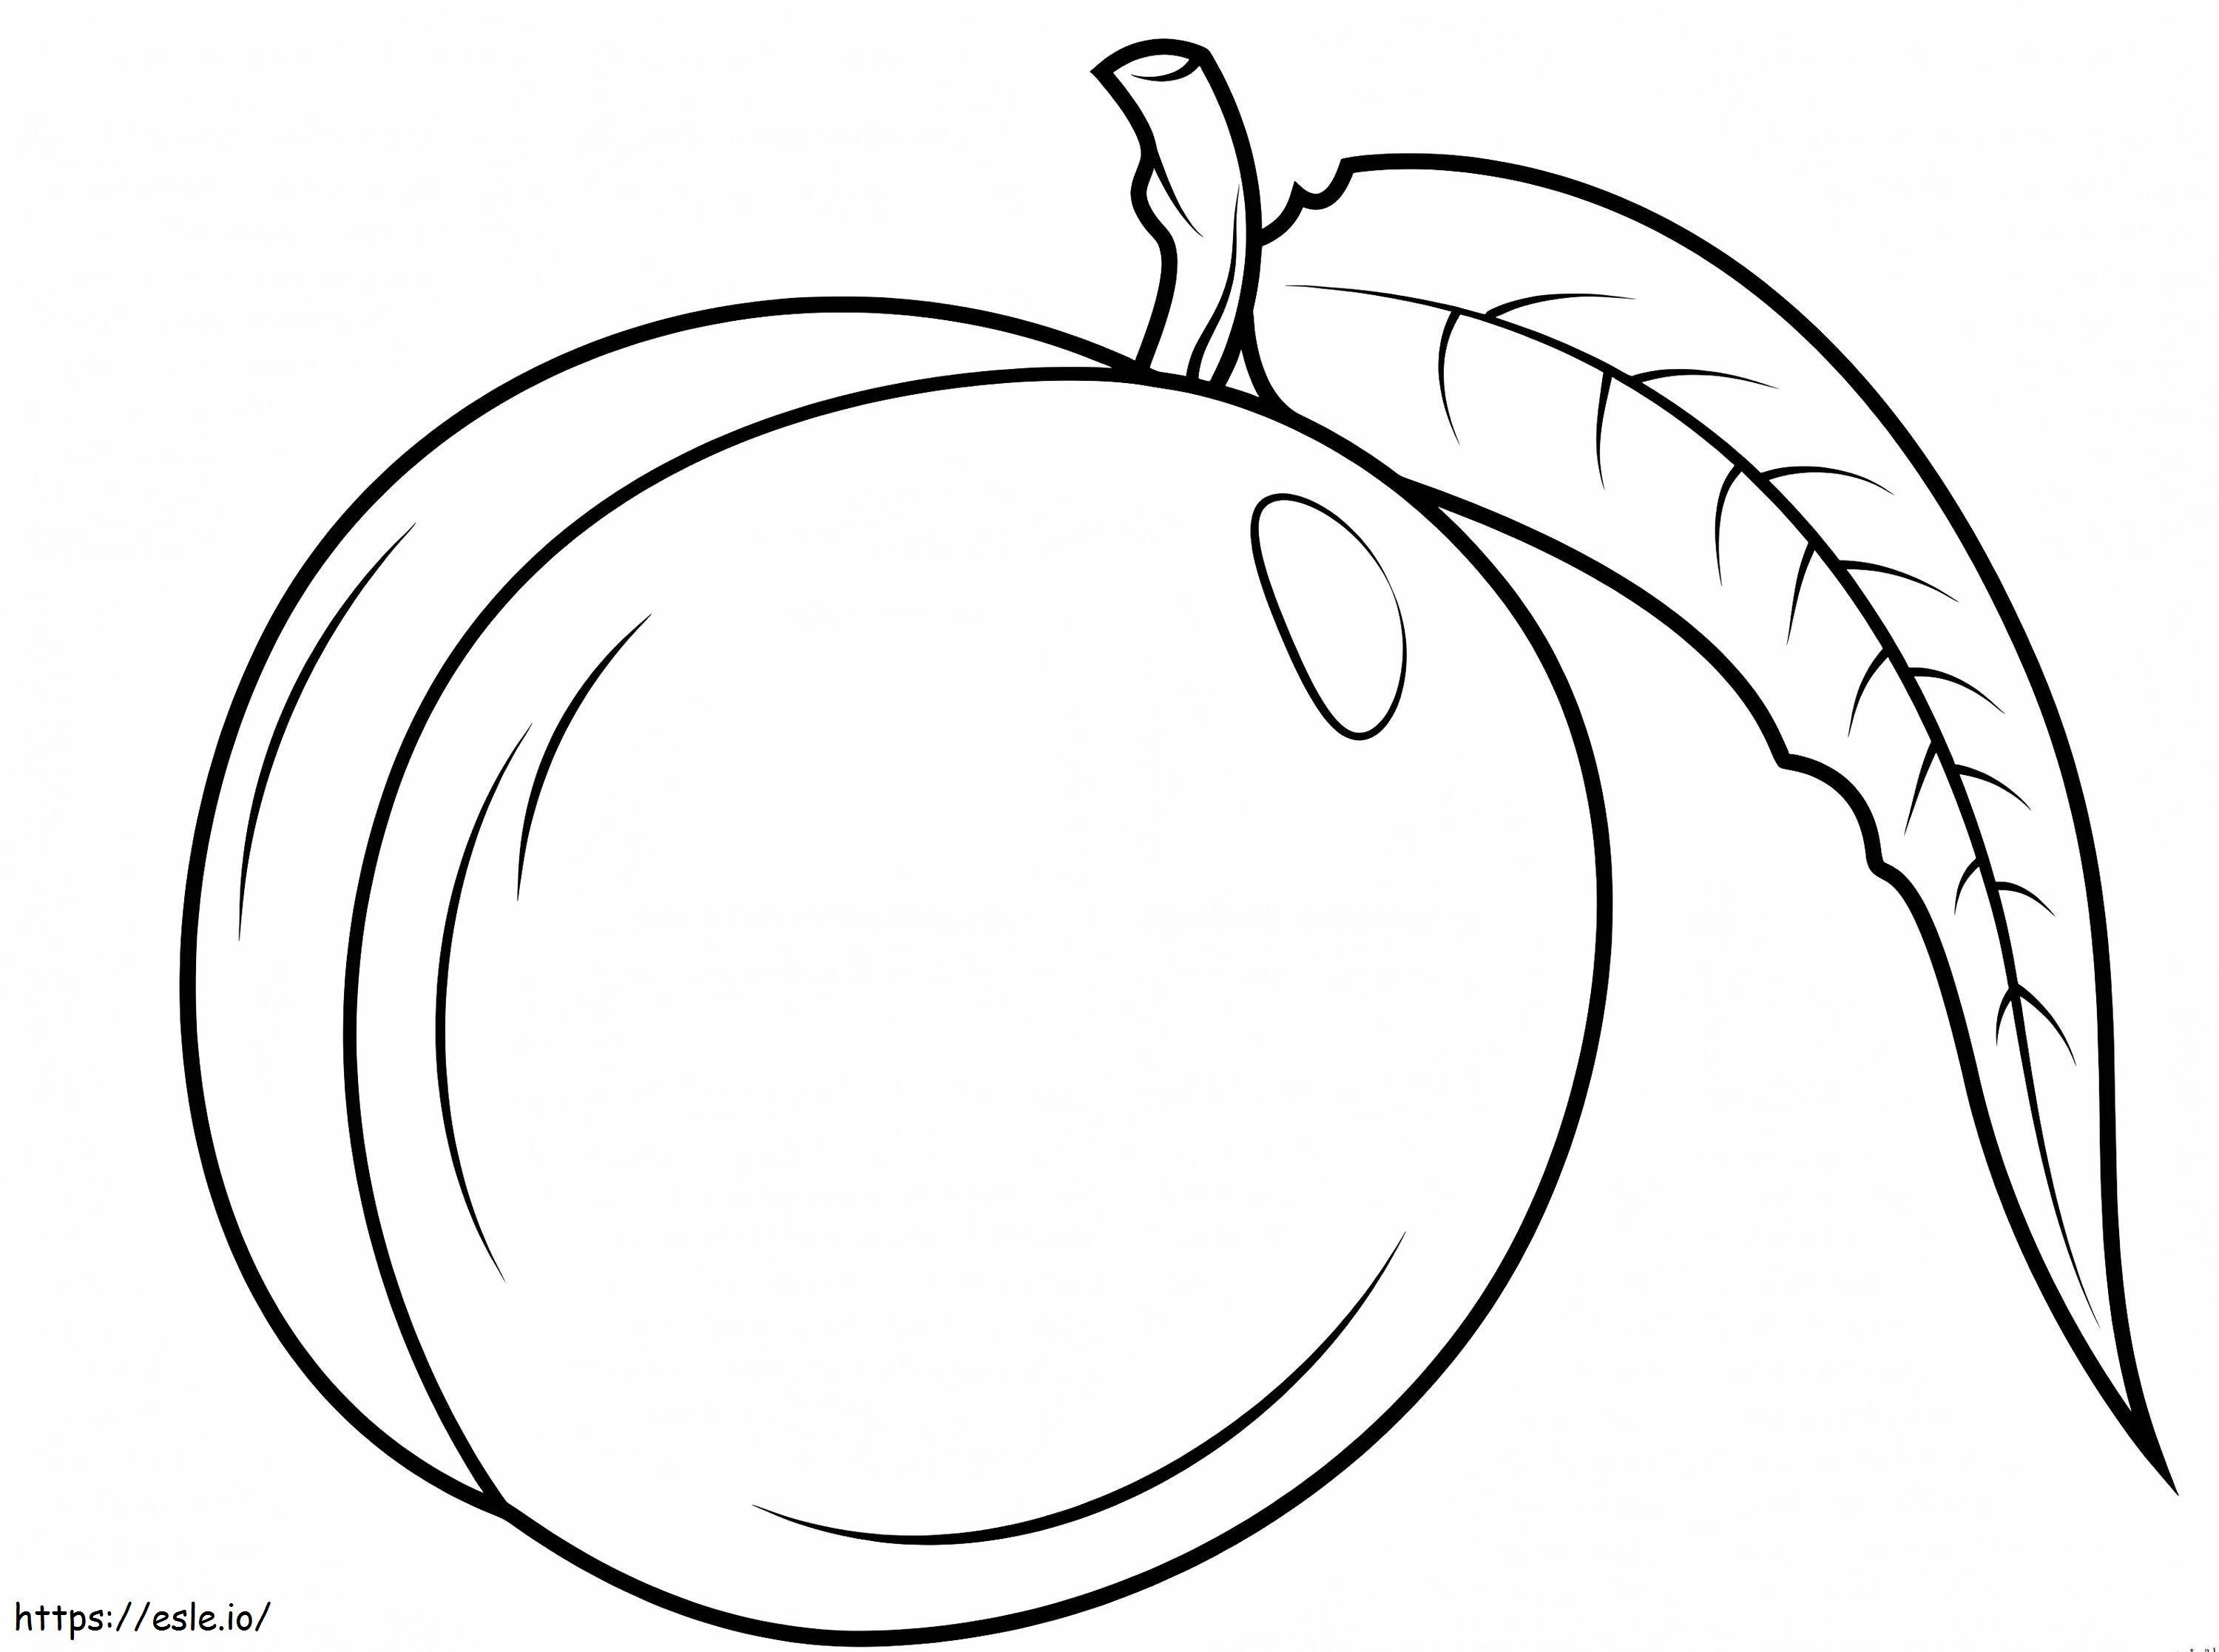 1559789077 A Nectarine A4 coloring page